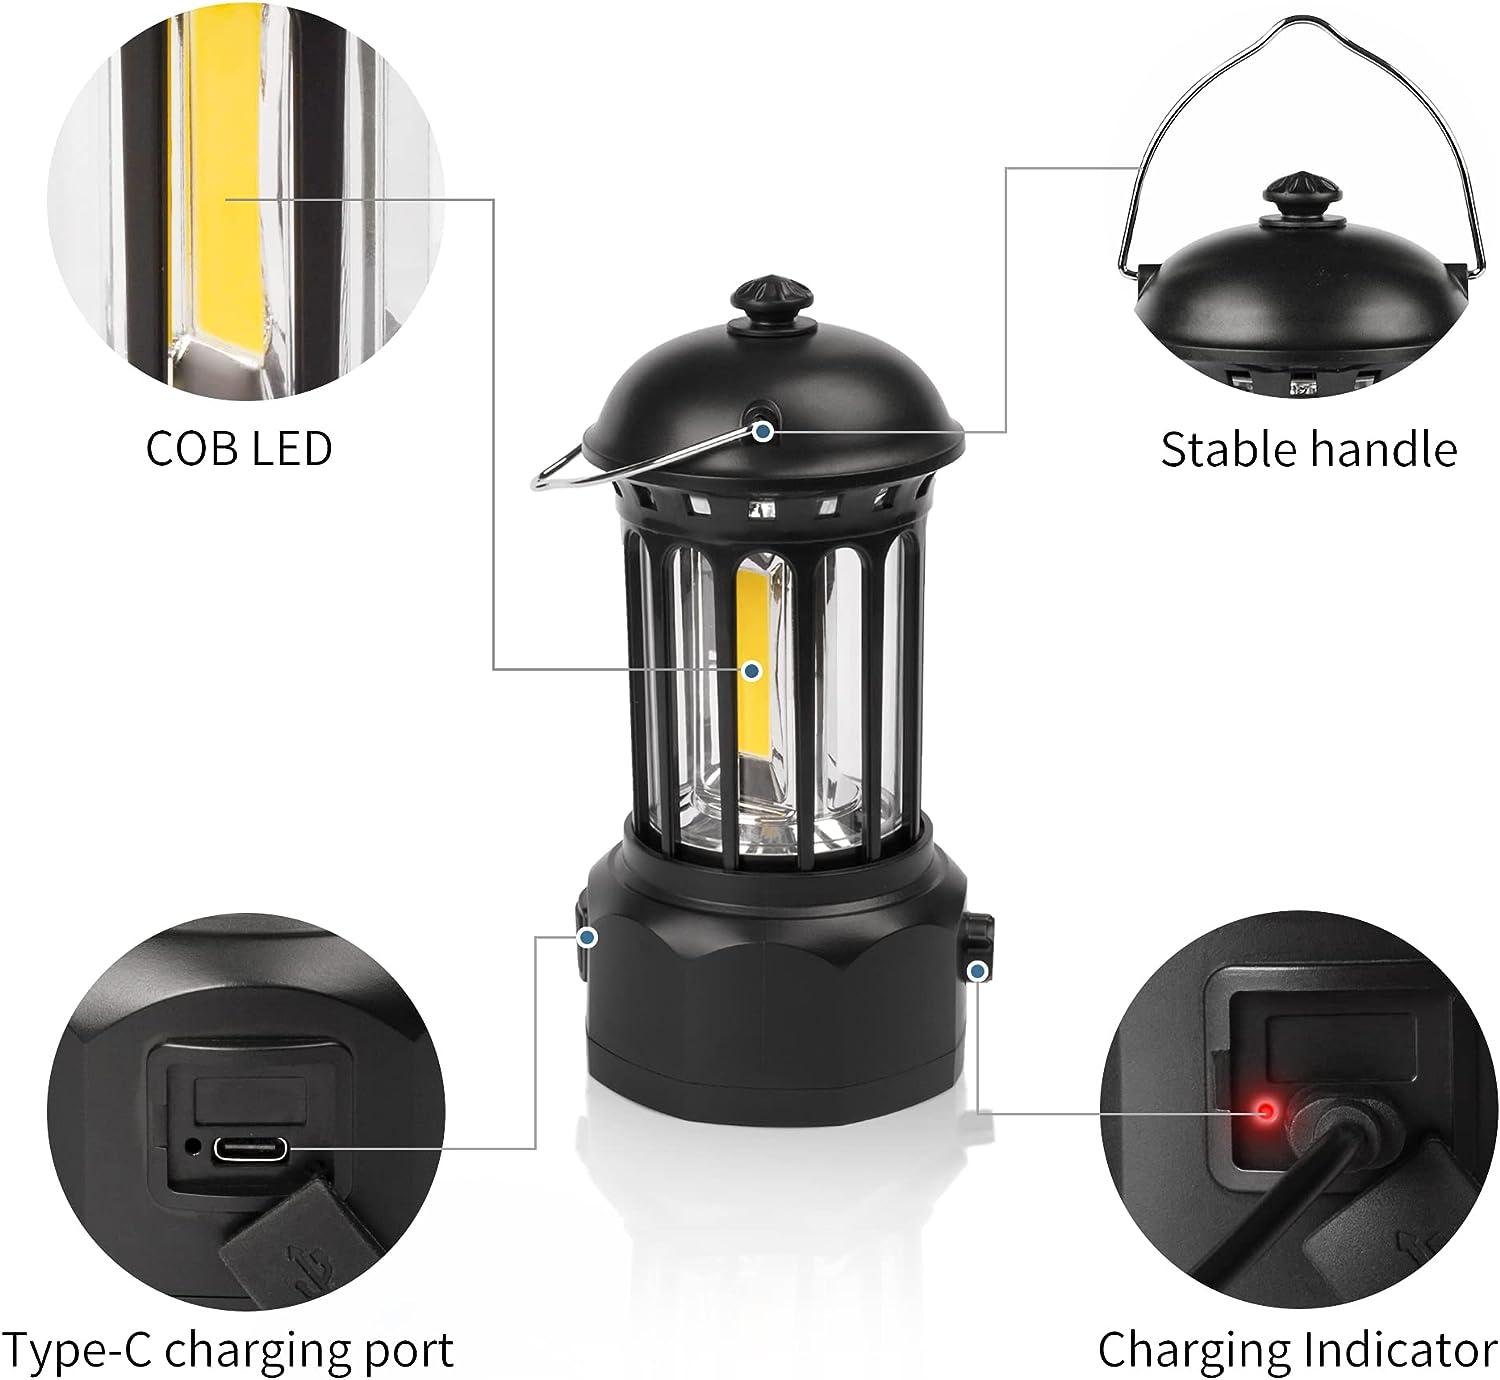 Switched Rechargeable Emergency Lantern With Power Bank 600 Lumen - Black